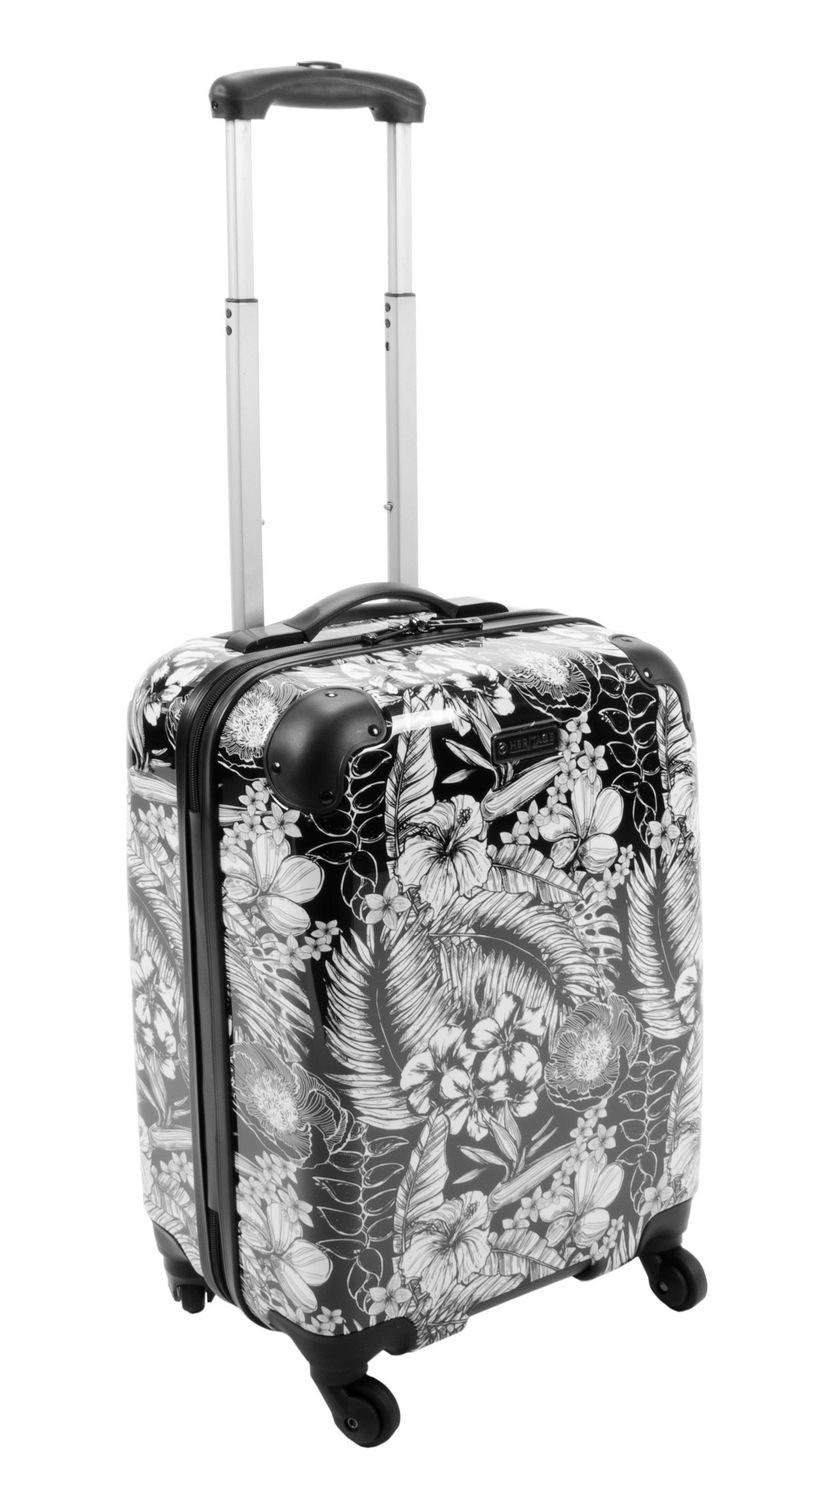 STYLE TO GO 19&quot; Spinner Carry-on Luggage | Walmart Canada